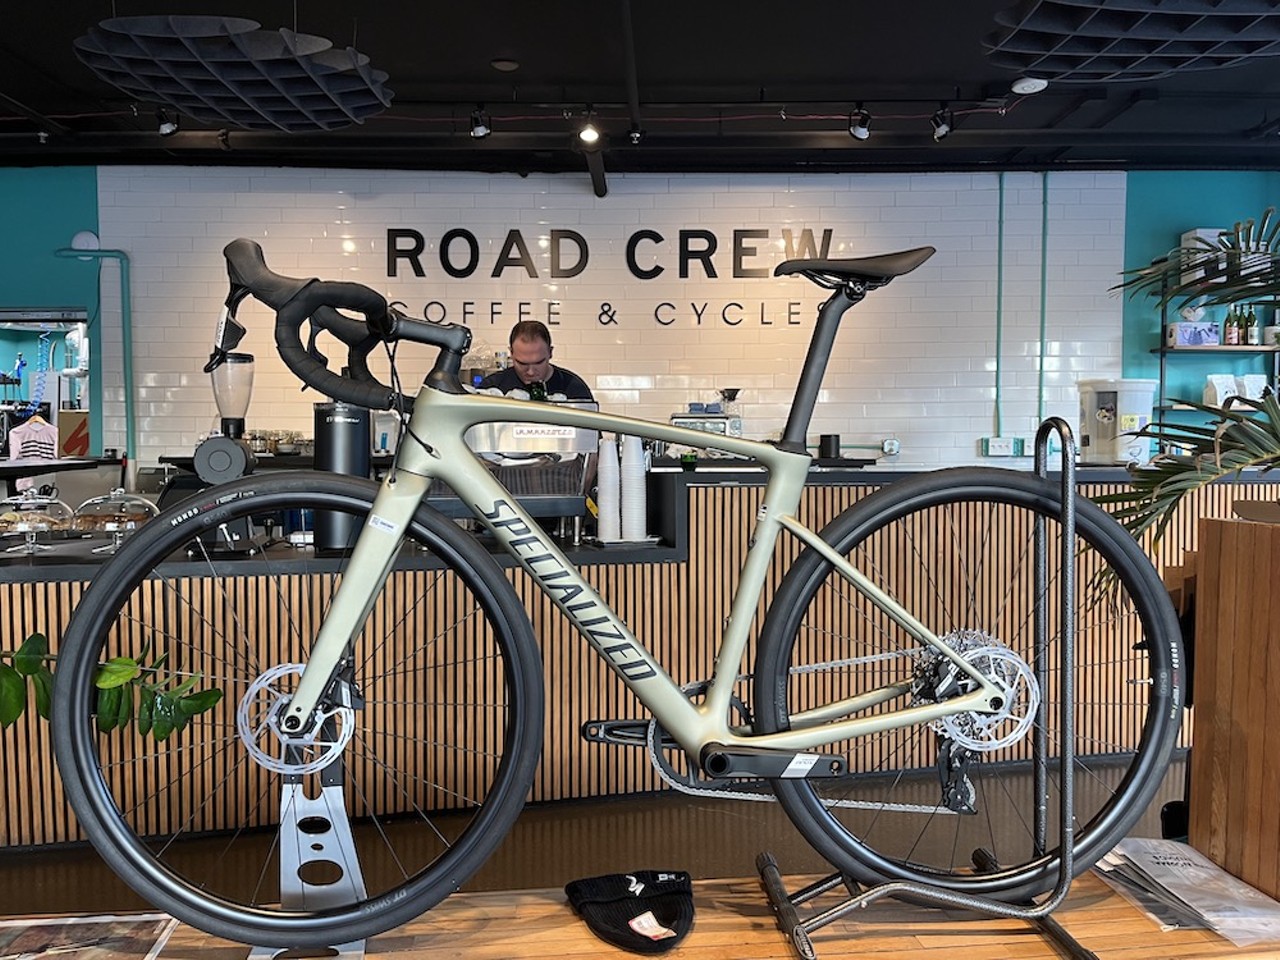 Road Crew Coffee & Cycles“Do one thing. Do it well.” That adage is for the birds. Road Crew Coffee (3172 Morgan Ford Road, roadcrew.cc) does two things insanely well: bikes and coffee. Co-owner Chris Green says that the shop was born of necessity. “We were riding around wanting coffee,” says Green. “Sometimes you go to a coffee shop wearing a [cyclist’s] kit and it doesn’t feel totally accepted. But as cyclists we all love coffee. It’s energy. It keeps us going.” Opened in 2019, Road Crew is the perfect embodiment of both those passions. The guy tuning up your bicycle in the back room brings just as much acumen and care to your bike as the barista behind the counter does to your coffee. The oat milk latte is exceptional — same goes for any espresso-based drink on the menu, for that matter. The cafe side of the business has an open, sunny vibe, making it a great place to study or just watch cyclists roll in with their bikes. If you’re a rider yourself, every Monday evening when weather allows (i.e. not during winter), the shop hosts a group ride that starts and leaves at Road Crew. Get some caffeine in your system before you start rolling. After, chow down on a pastry, taking in the Morgan Ford vista. Your endorphins will keep spinning long after your wheels have stopped. —Ryan Krull